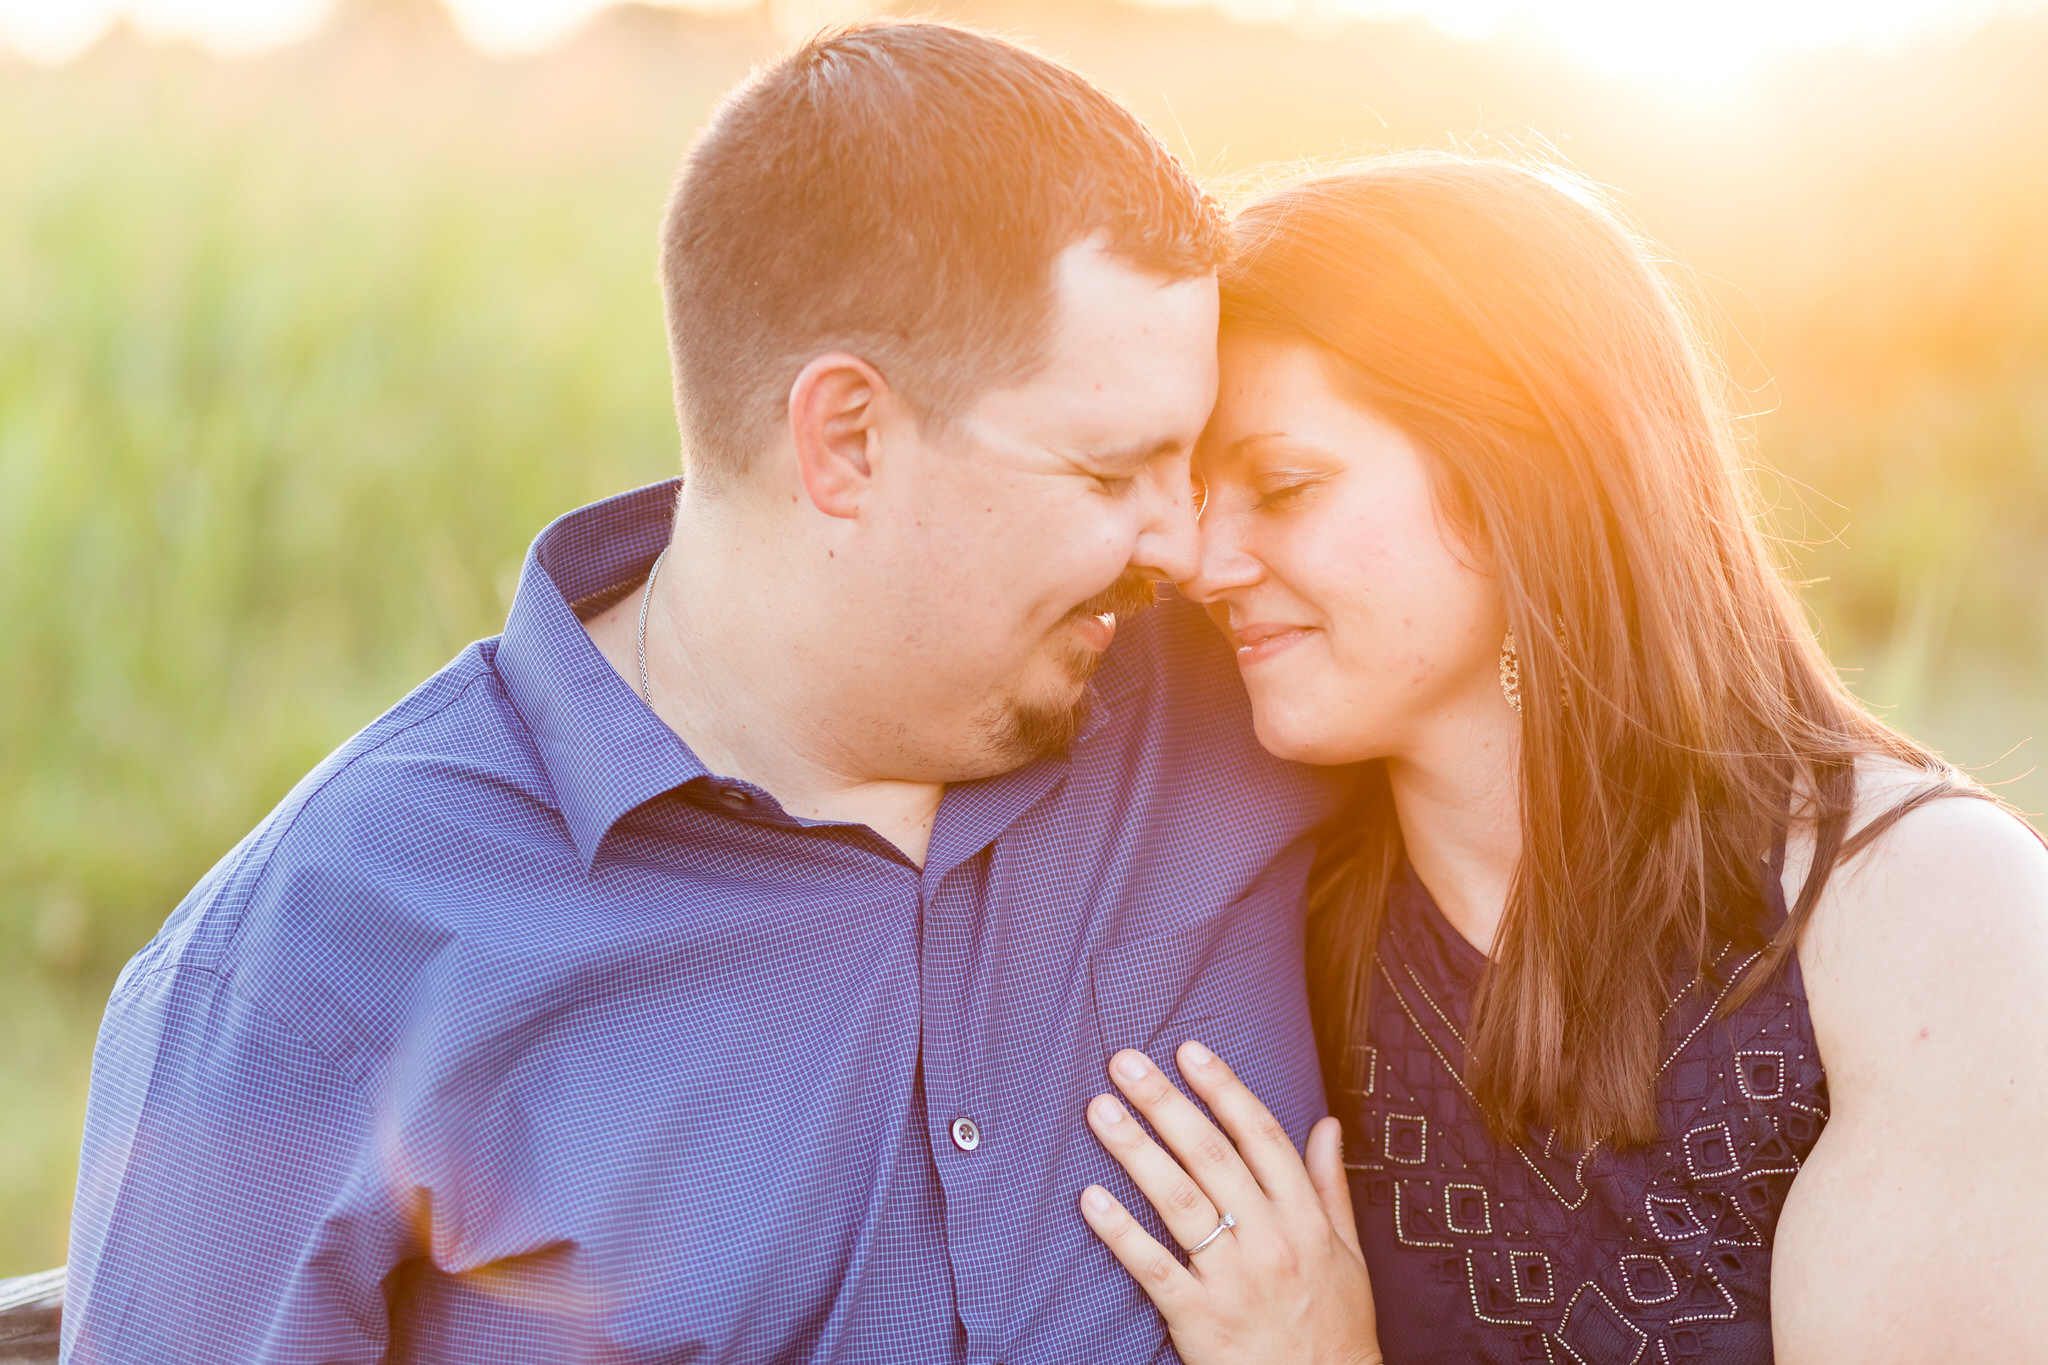 A Summer Engagement Session at Cibolo Nature Center in Boerne, TX by Dawn Elizabeth Studios